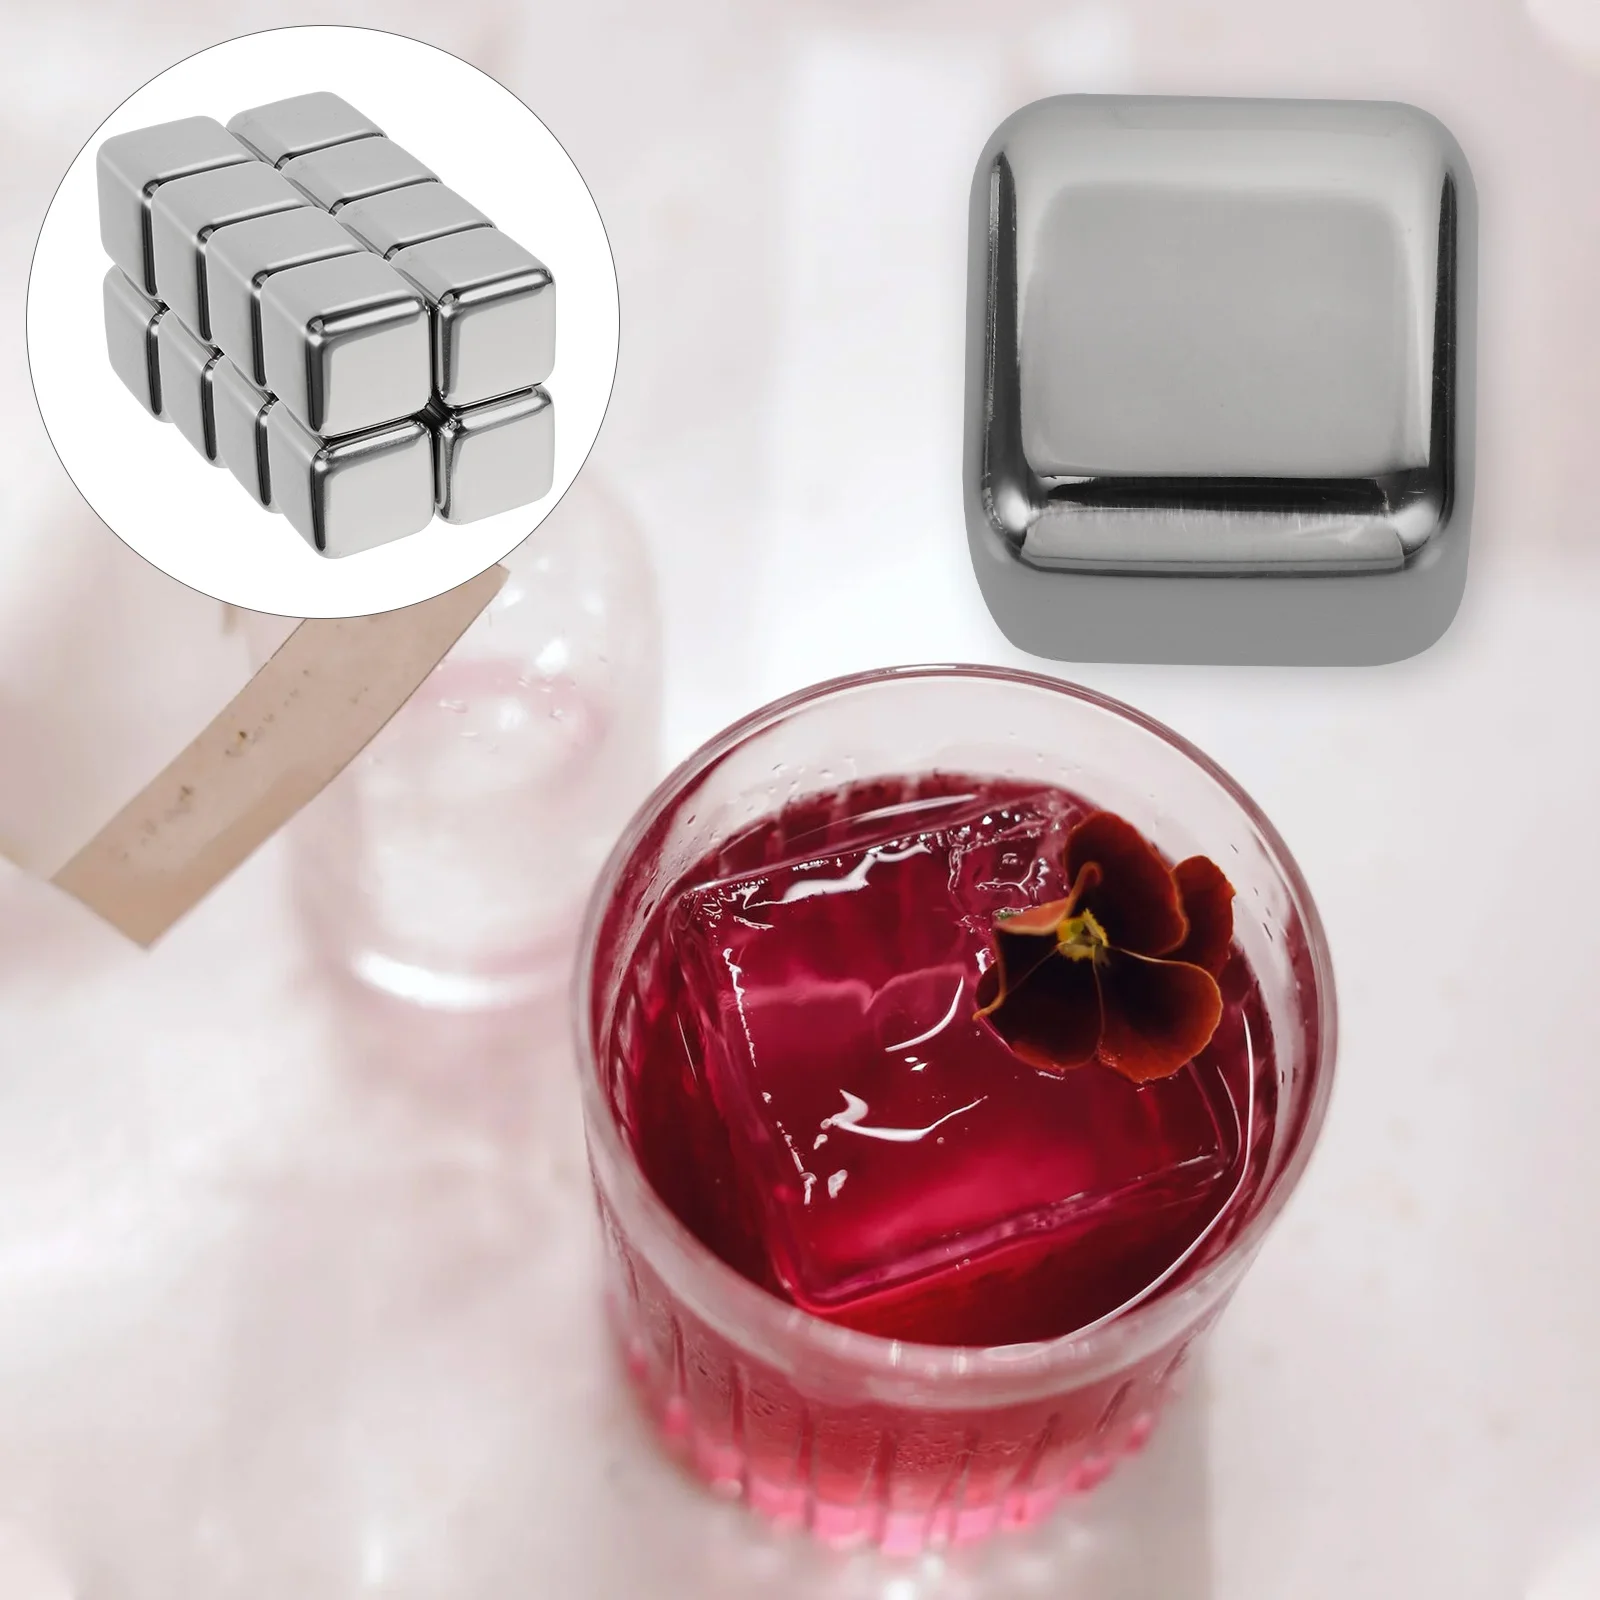 

12 Pcs Stainless Steel Ice Cubes Metal Drinks For Whiskey Particles Practical Reusable Household